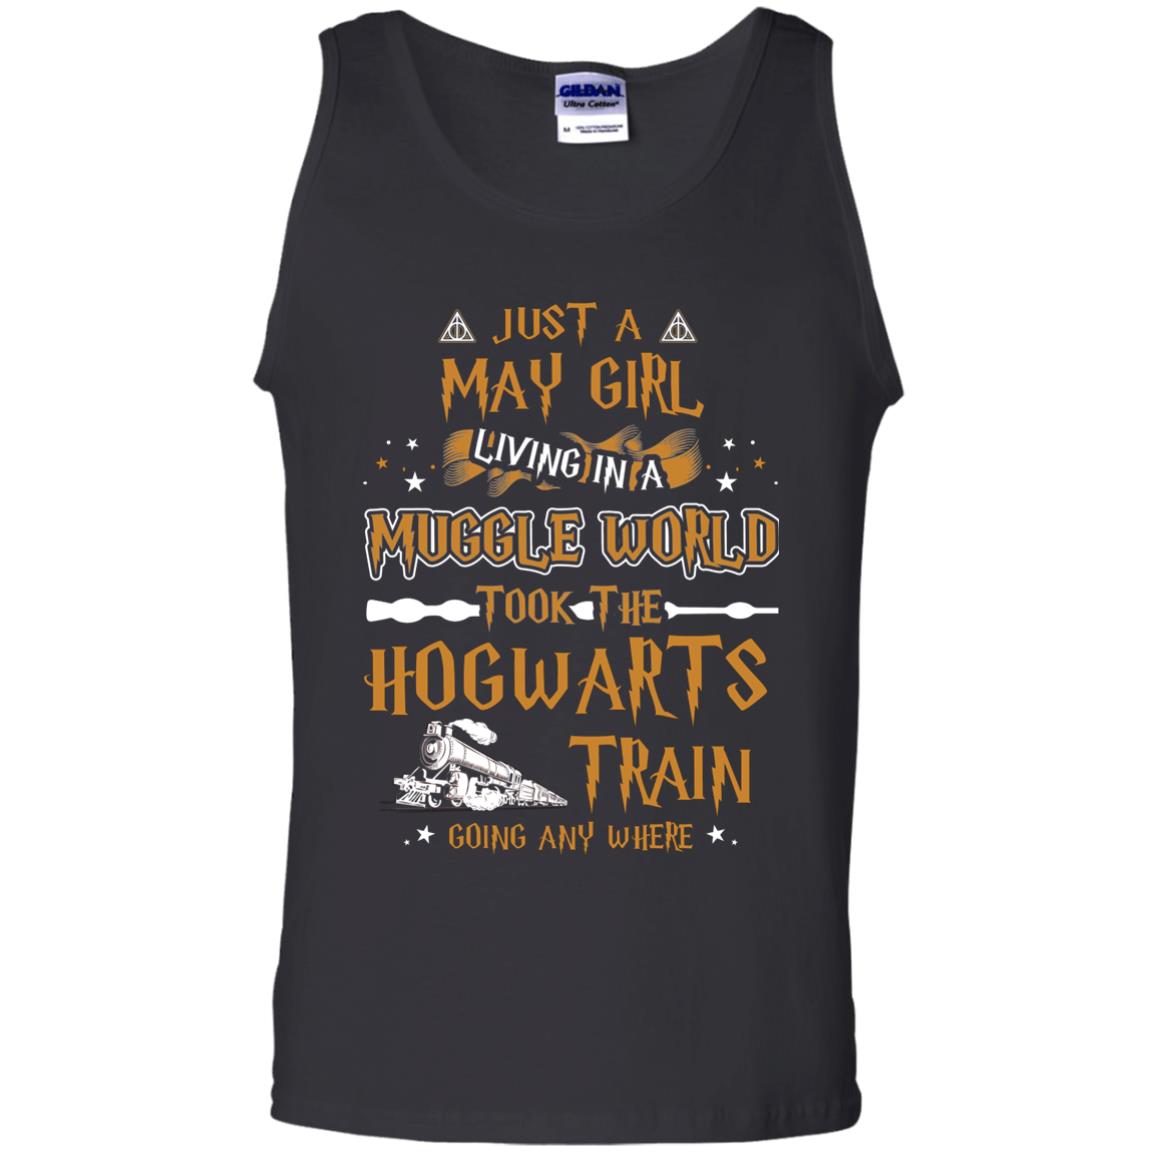 Just A May Girl Living In A Muggle World Took The Hogwarts Train Going Any WhereG220 Gildan 100% Cotton Tank Top